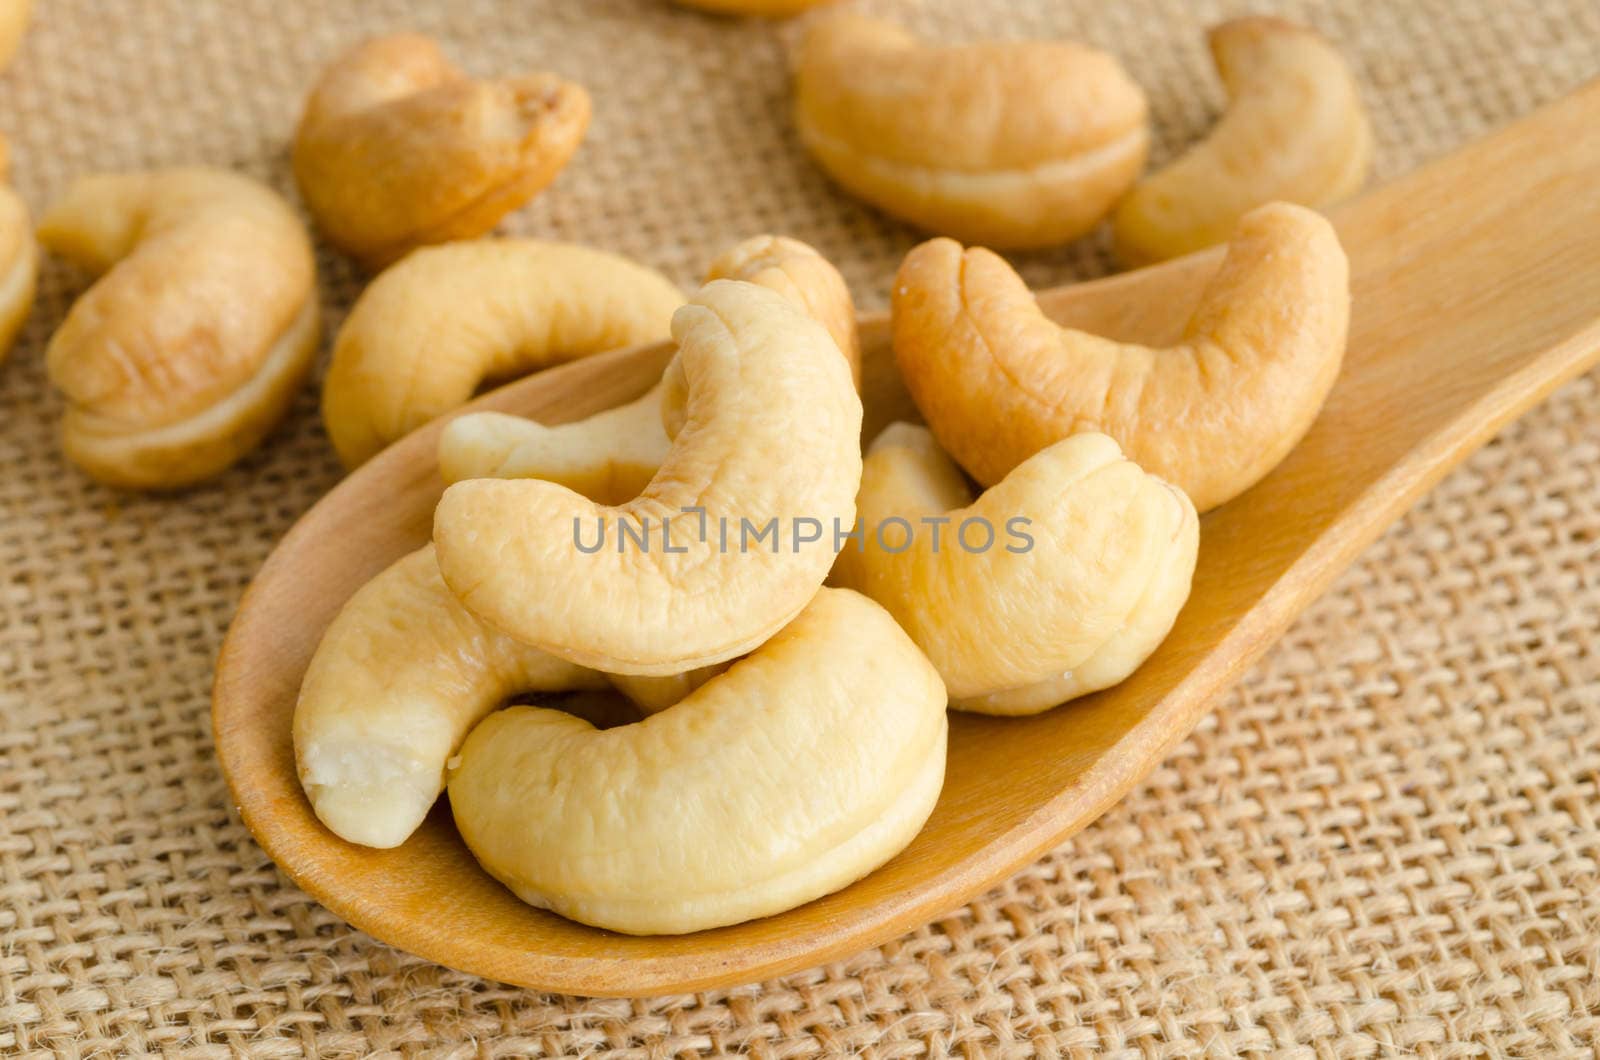 Cashews close-up in wooden spoon on sackcloth